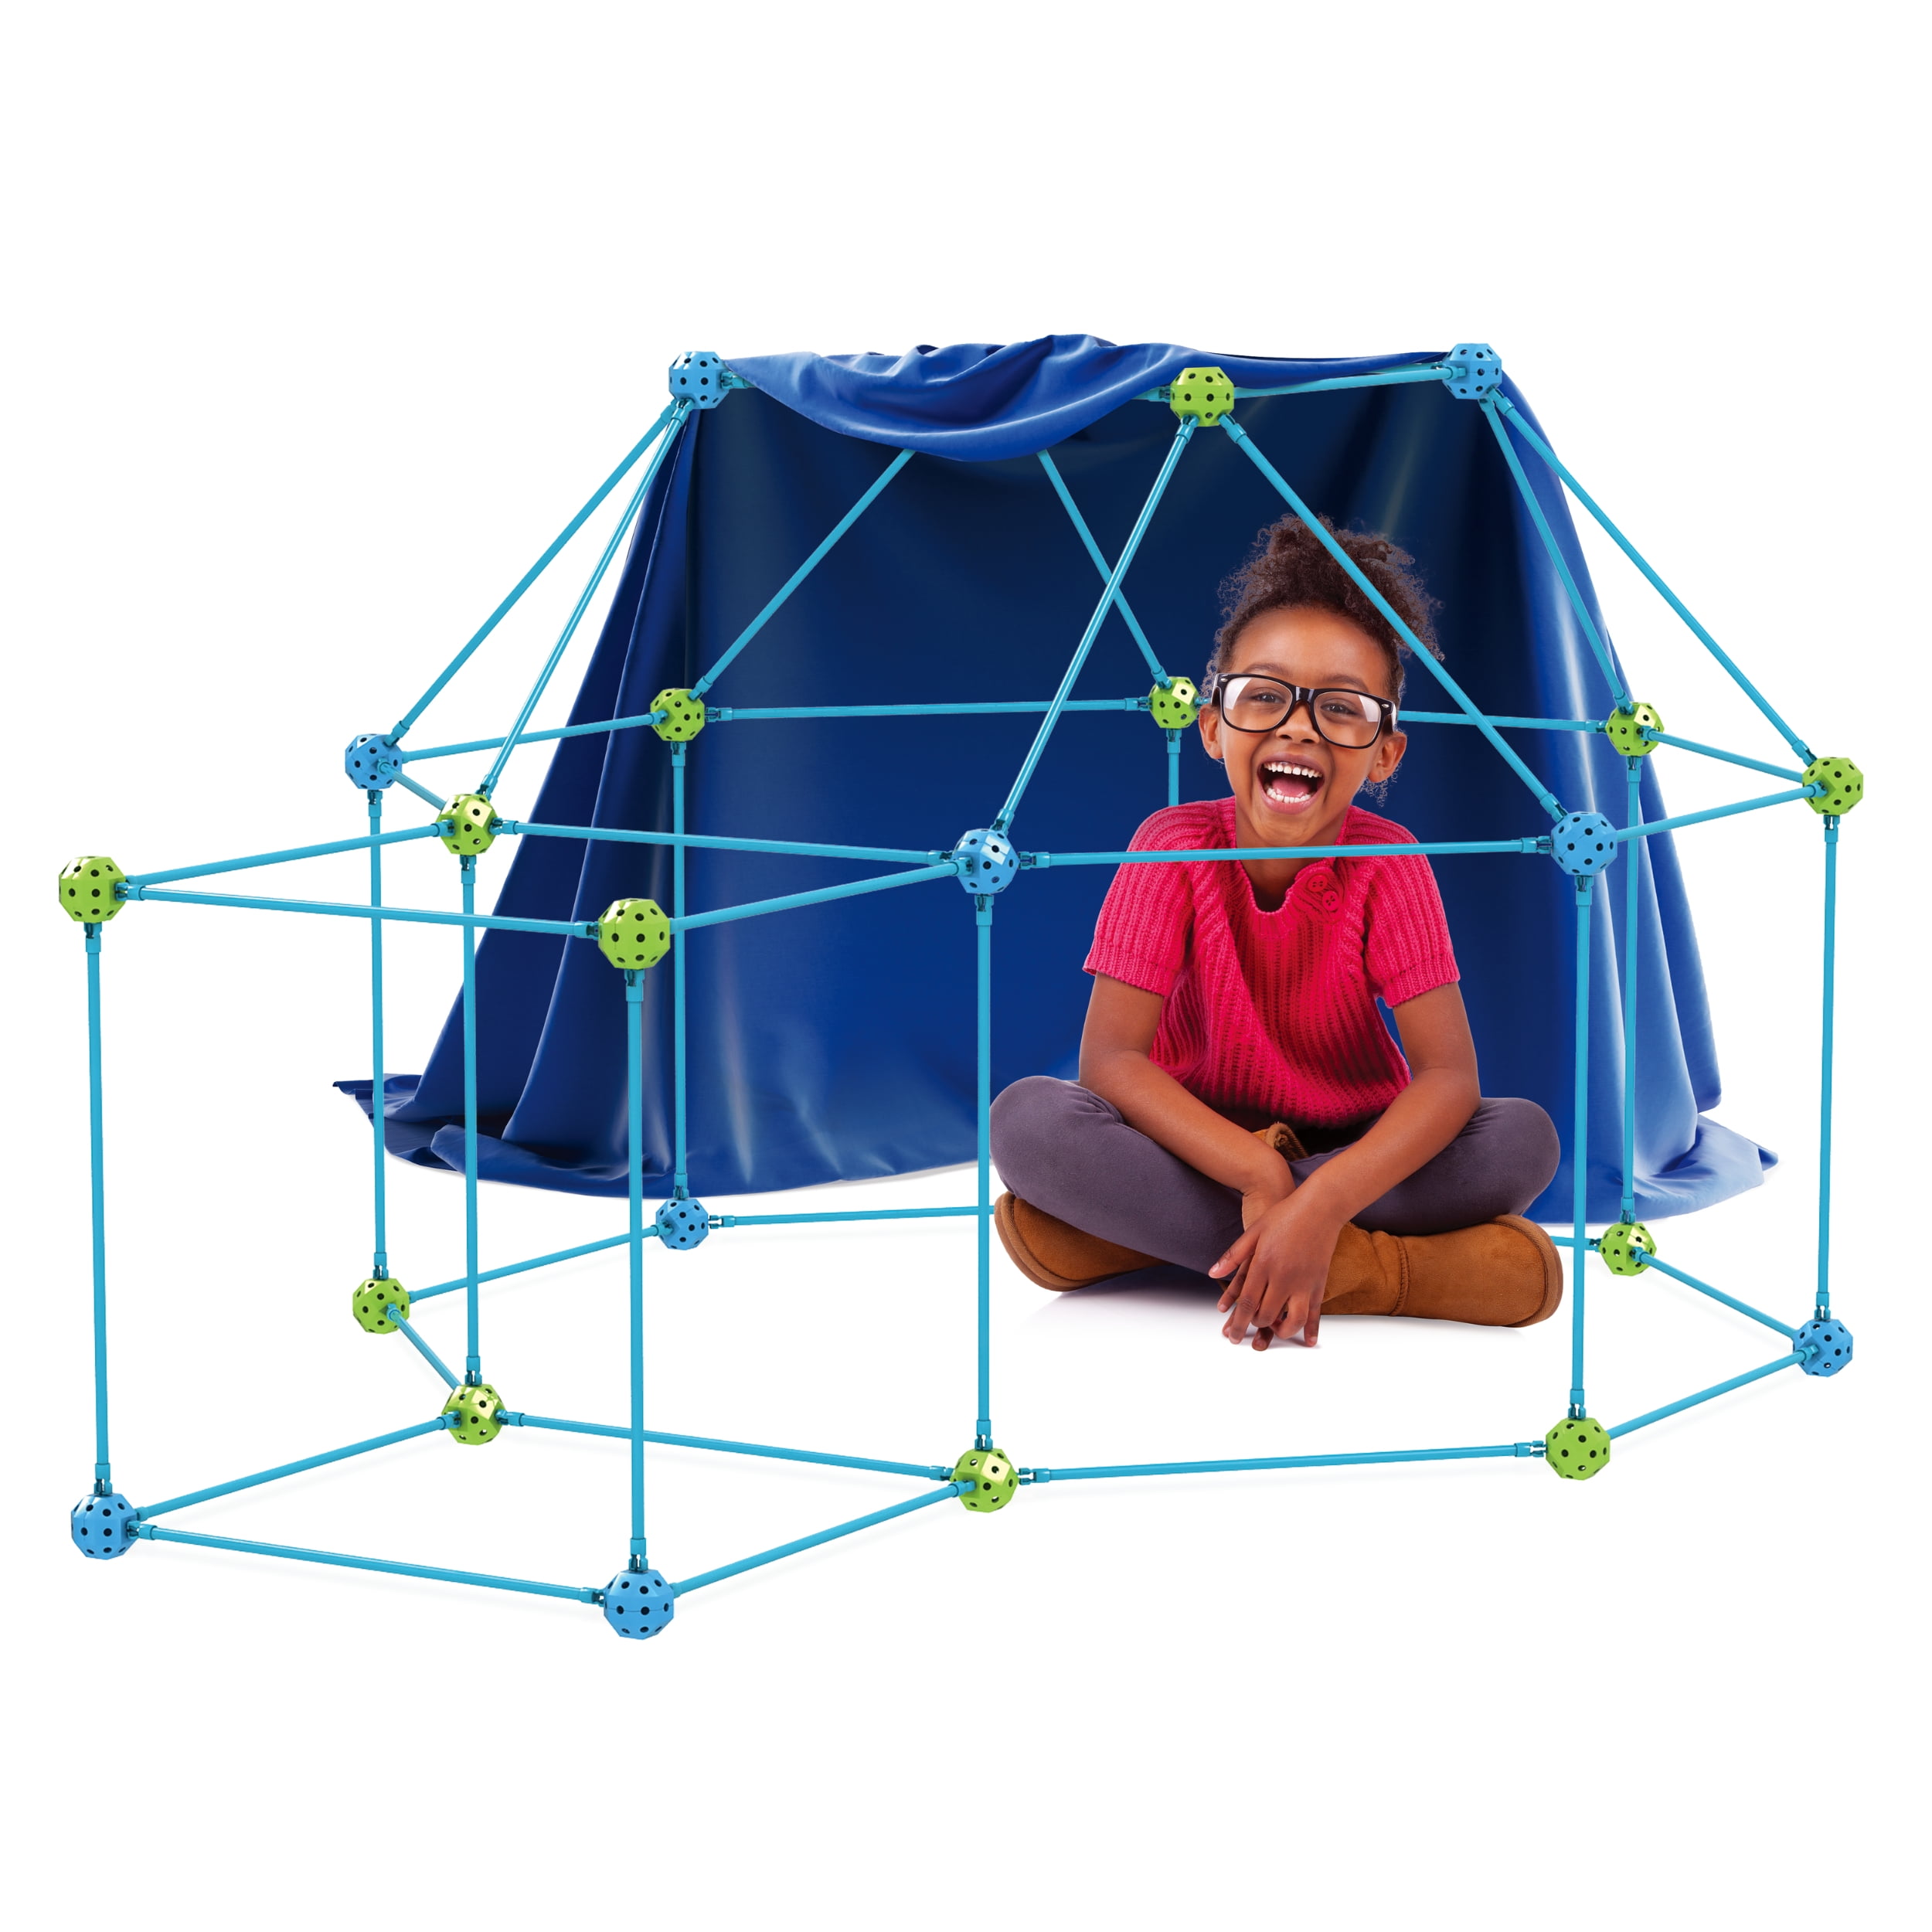 DIY Fort Building Construction Kit - 85 Pieces - NYLAH NAILED IT